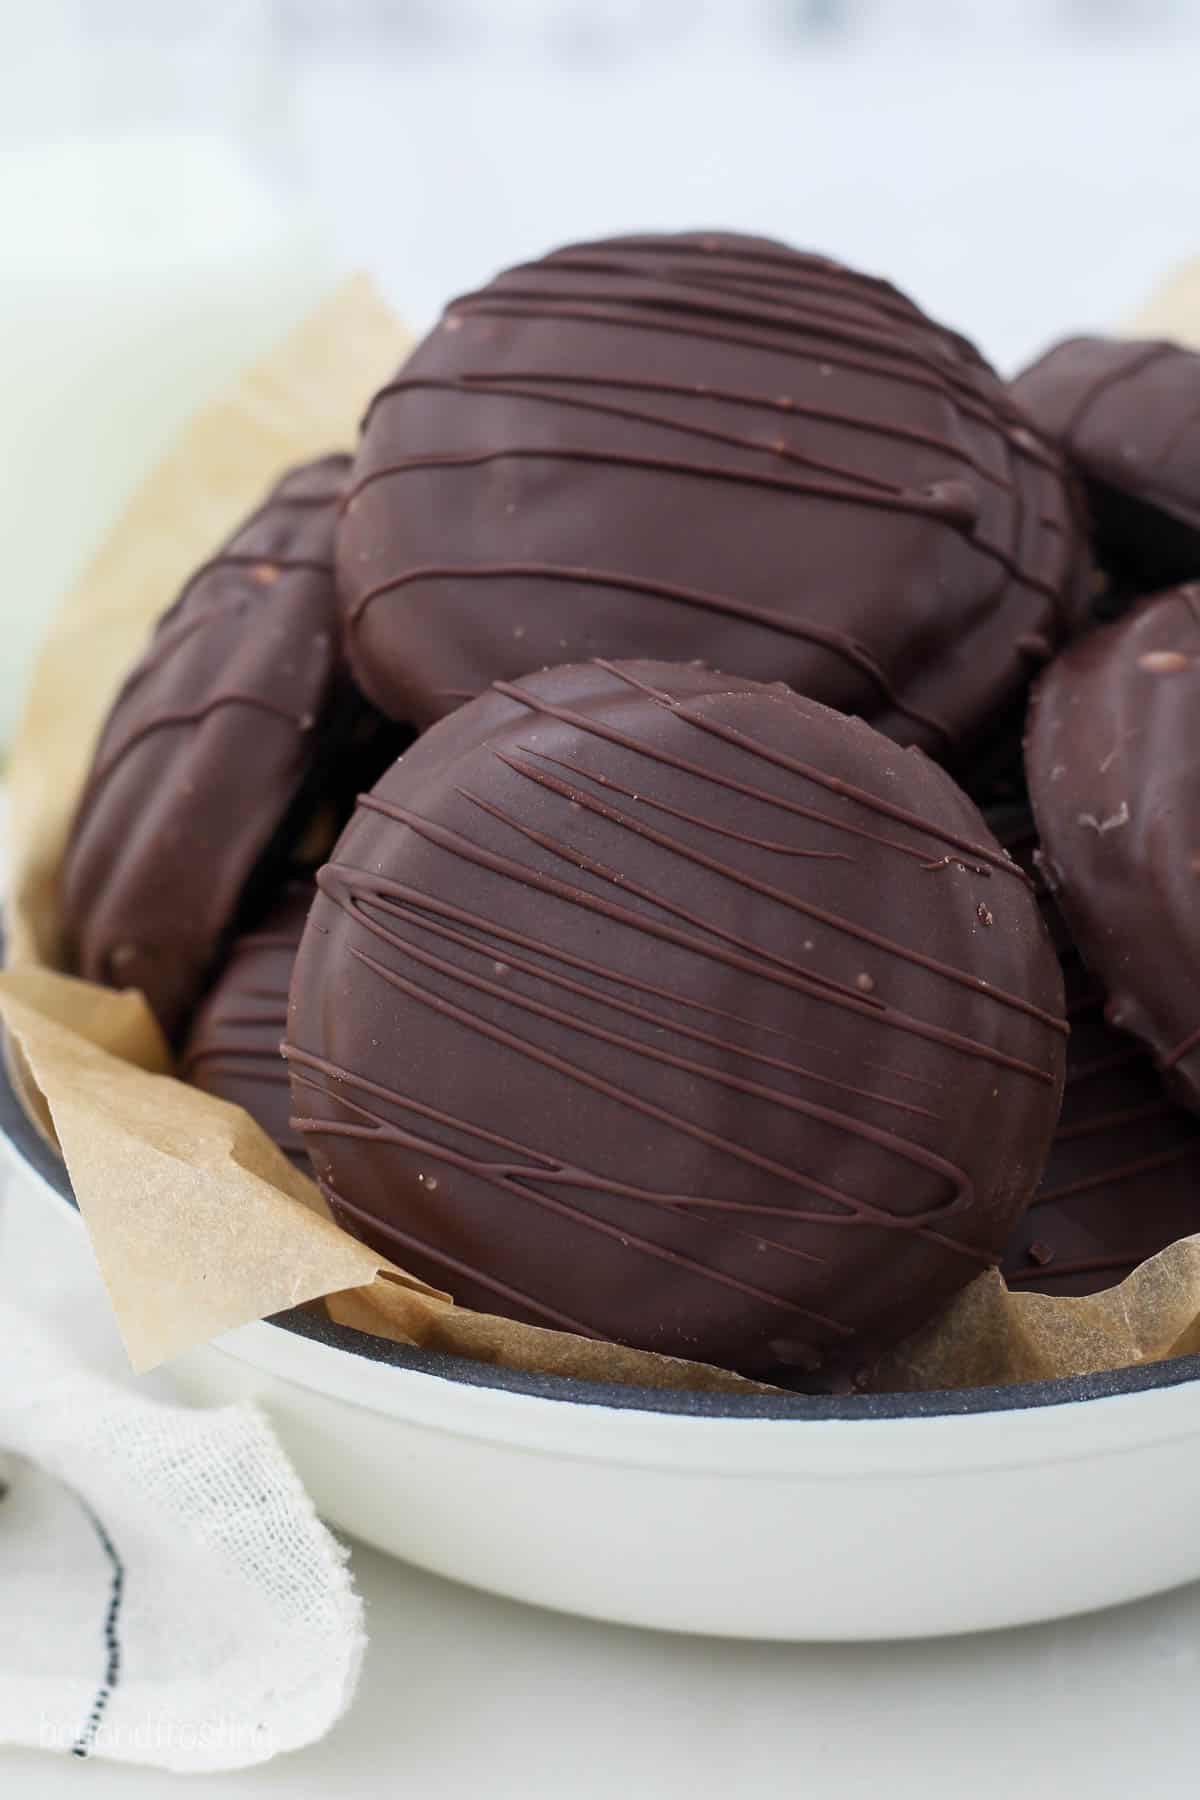 Chocolate coated Tagalong Cookies in a white dish